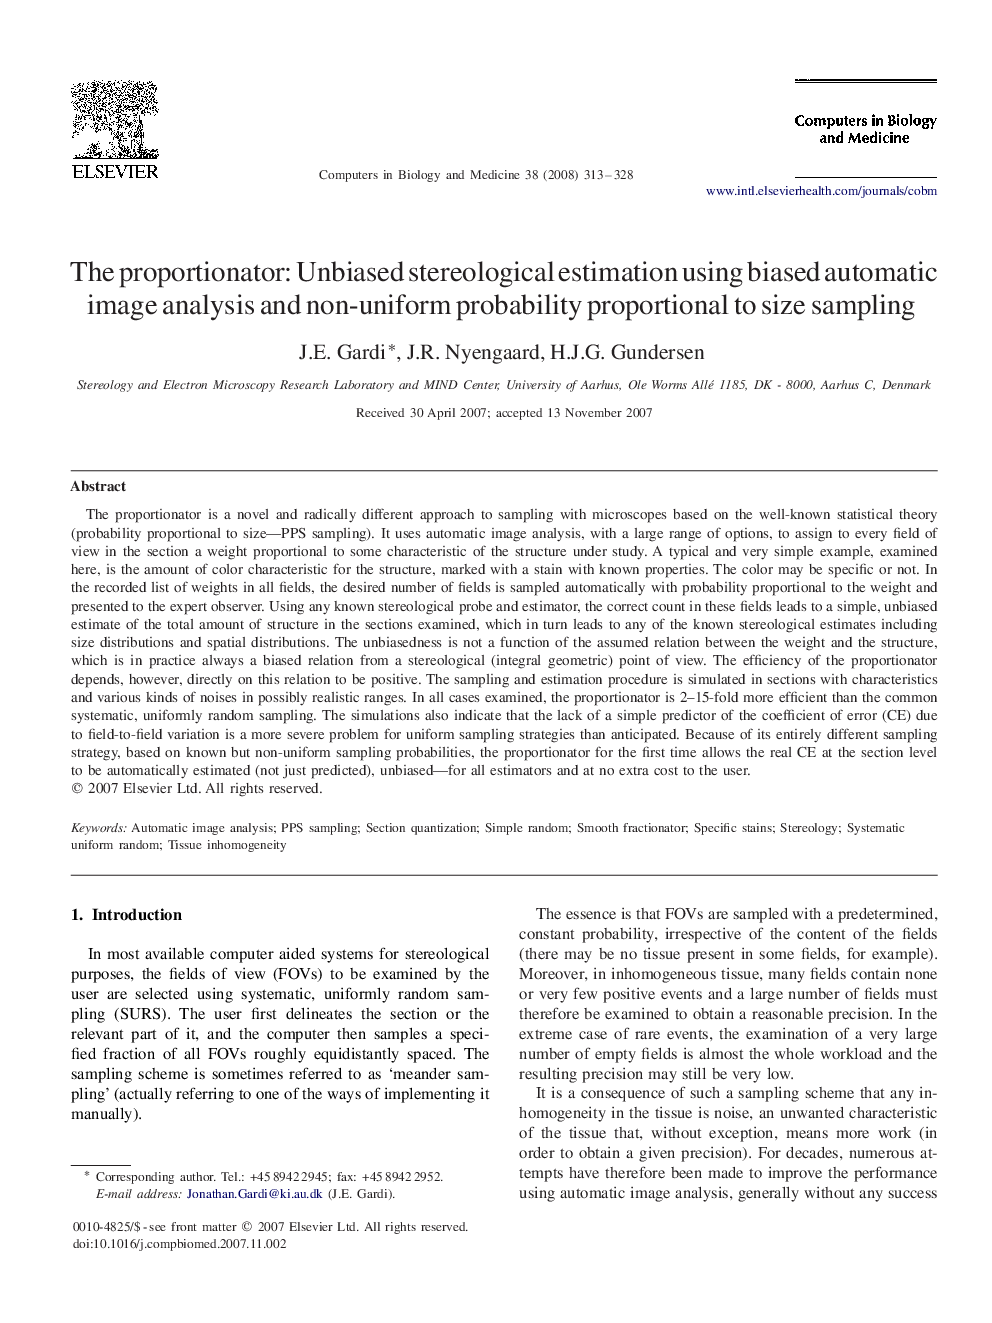 The proportionator: Unbiased stereological estimation using biased automatic image analysis and non-uniform probability proportional to size sampling